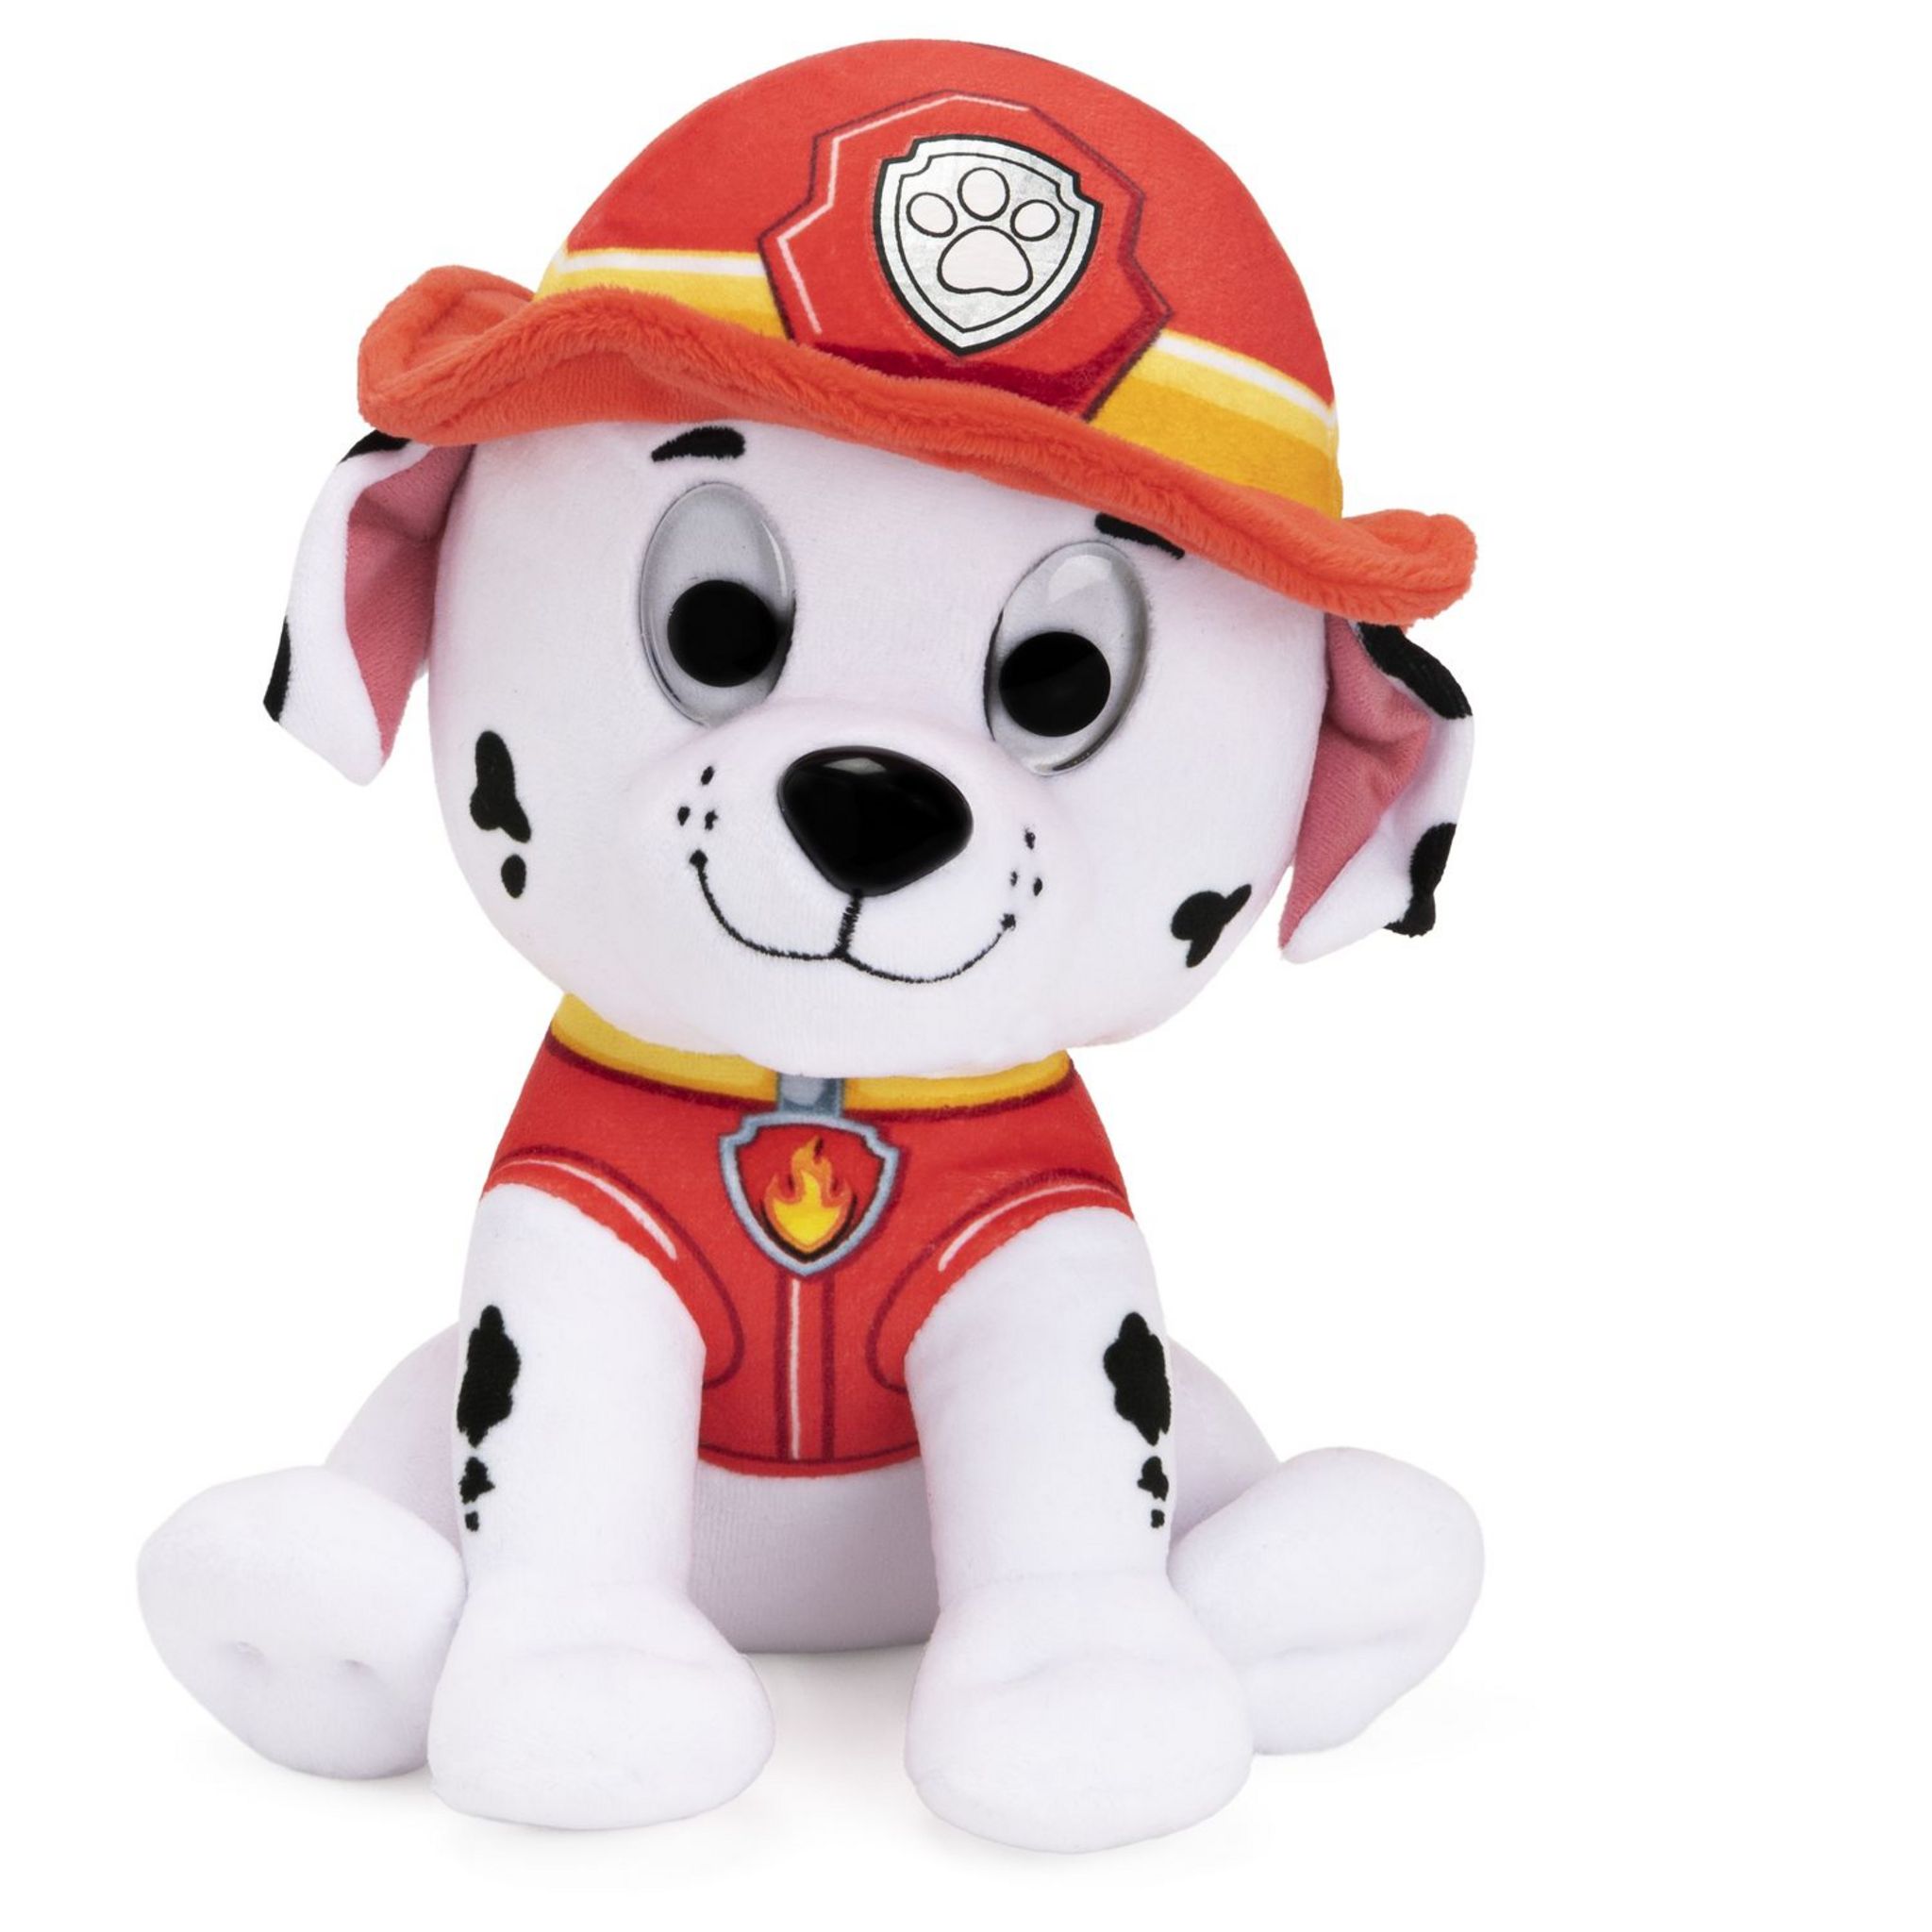 Peluche veilleuse Marcus 30cm - La Pat'Patrouille Spin Master : King Jouet,  Peluches interactives Spin Master - Peluches